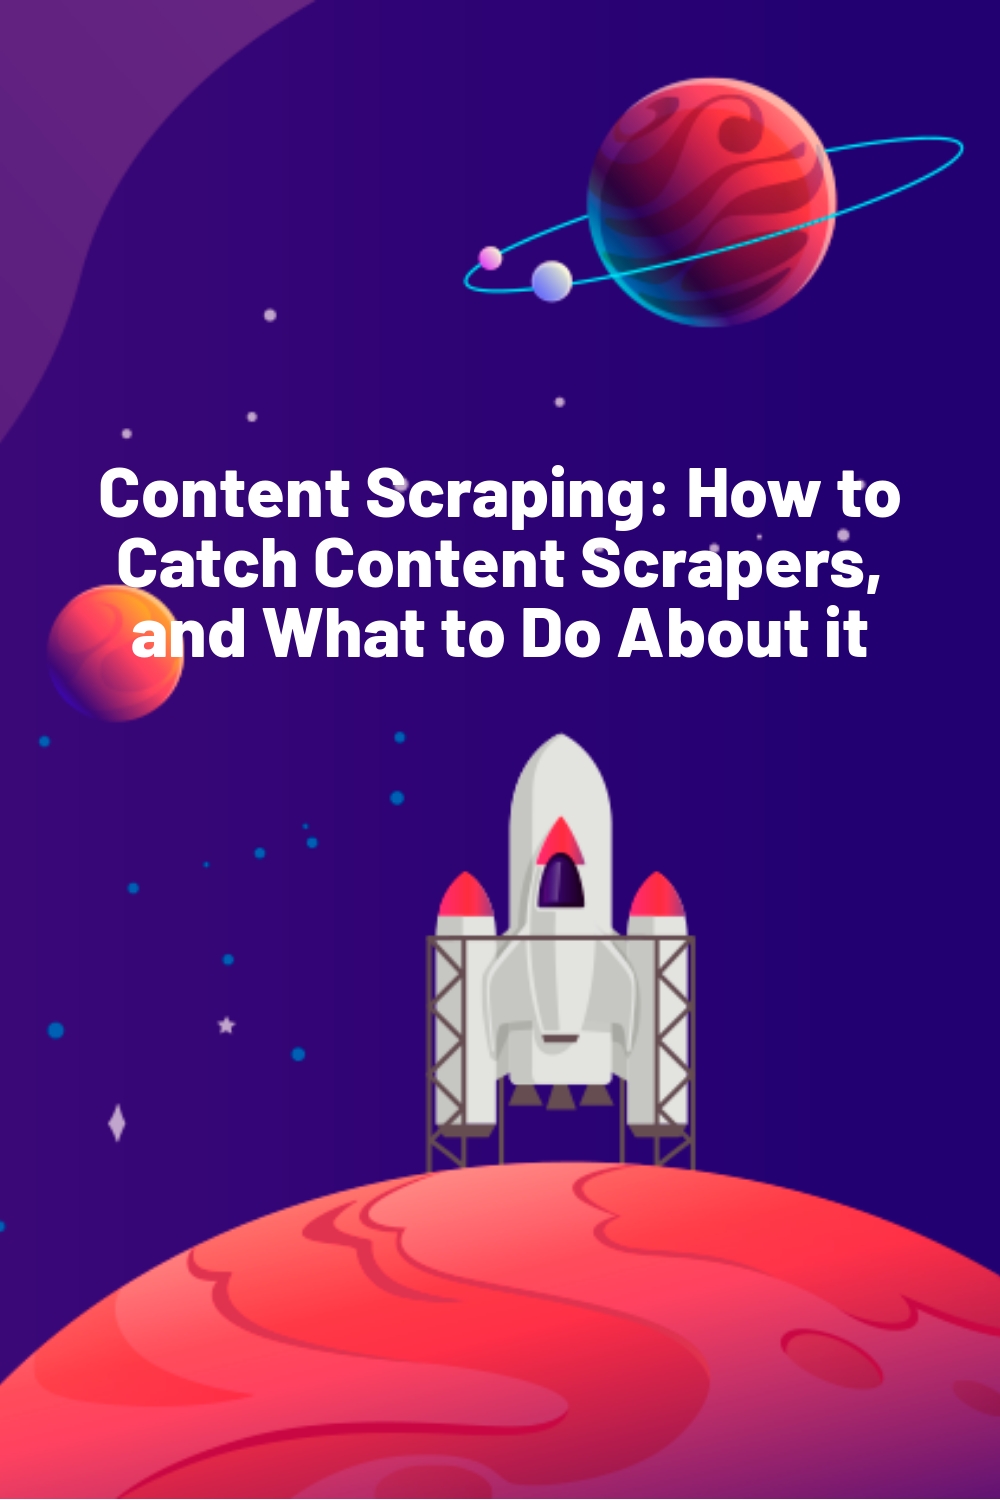 Content Scraping: How to Catch Content Scrapers, and What to Do About it